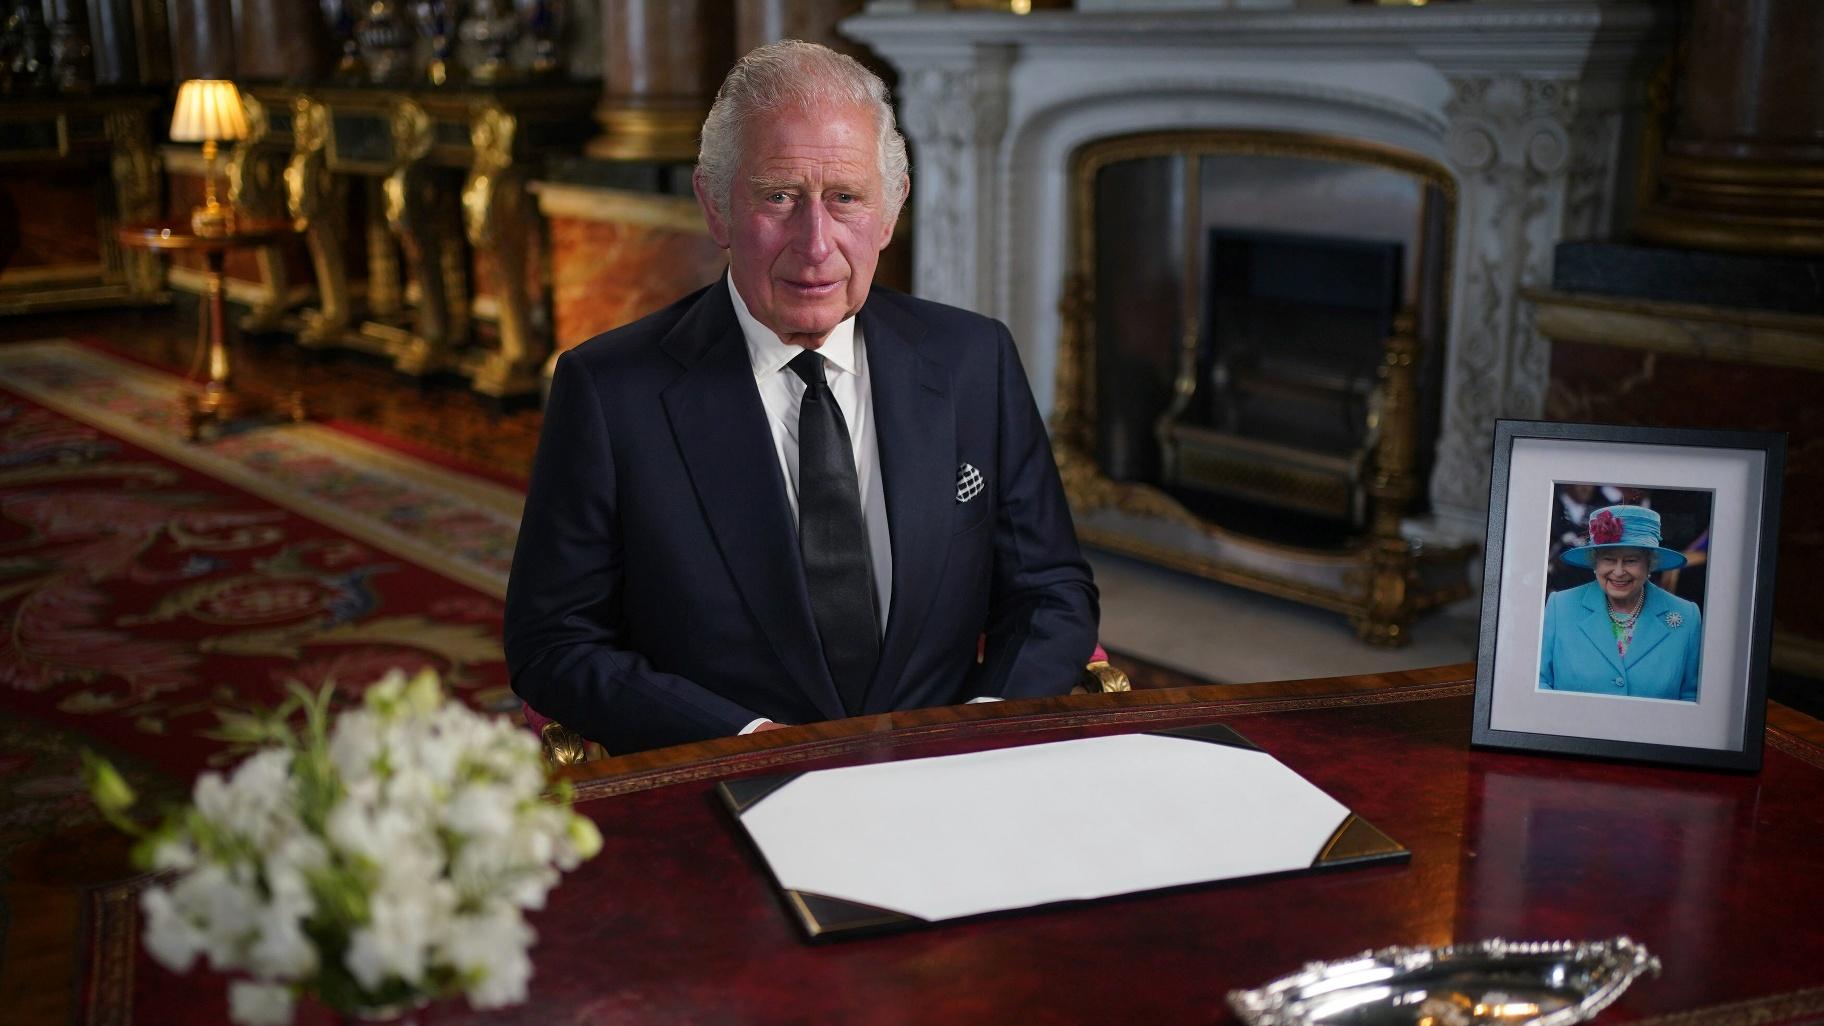 Britain’s King Charles III delivers his address to the nation and the Commonwealth from Buckingham Palace, London, Friday, Sept. 9, 2022, following the death of Queen Elizabeth II on Thursday. (Yui Mok / Pool Photo via AP)